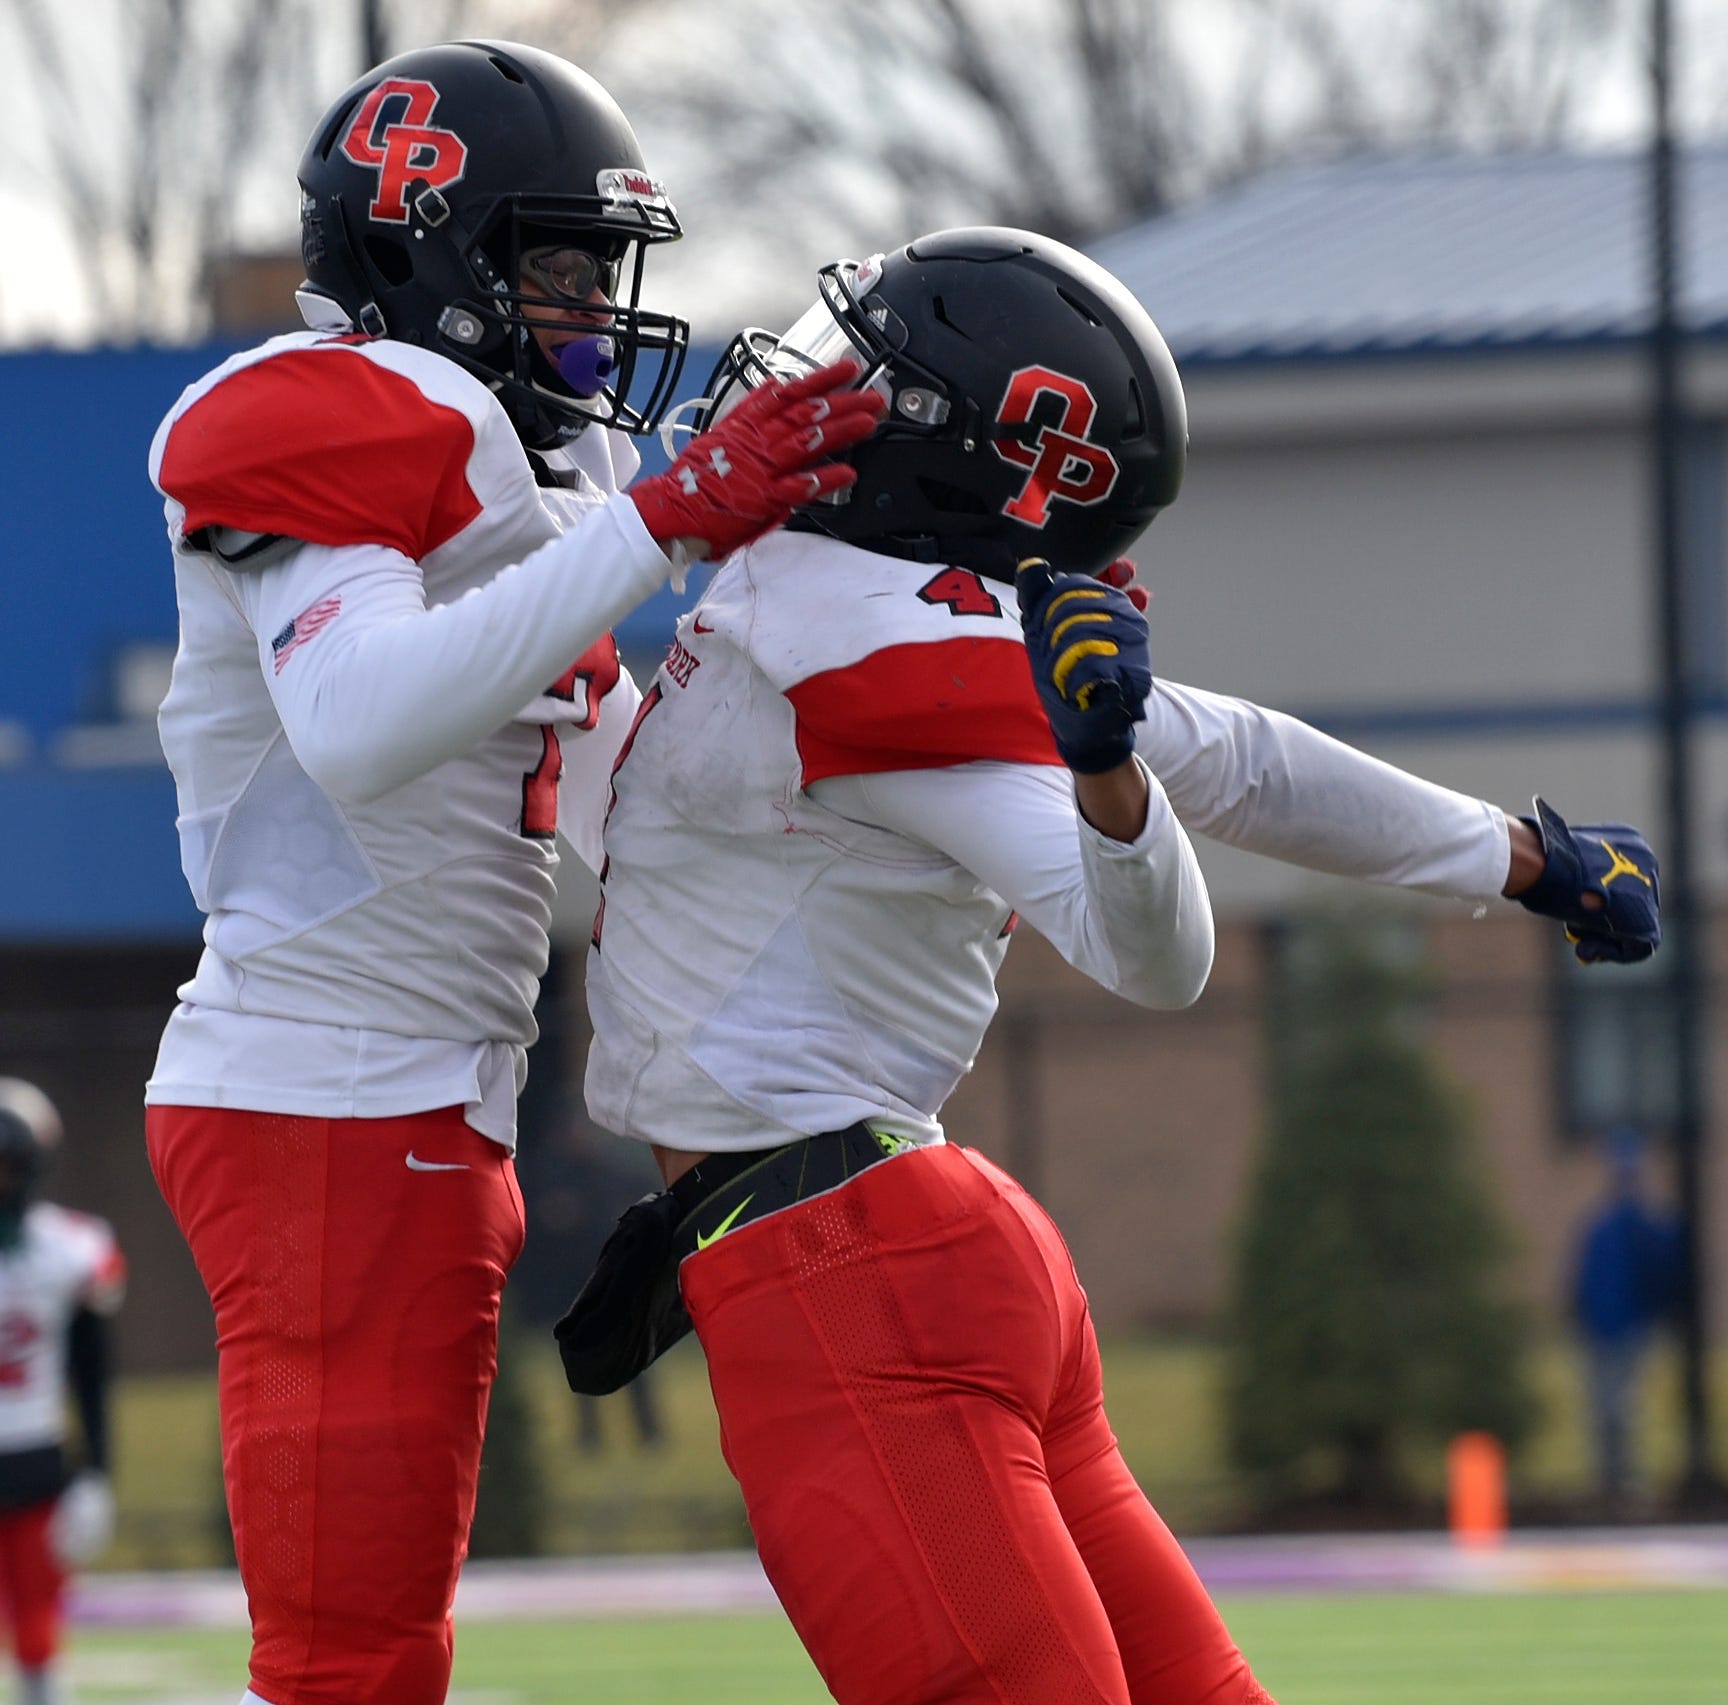 Oak Park's Amari Harris (4) celebrates his two-point conversion reception with Bwana Miller (7) midway through the fourth quarter.